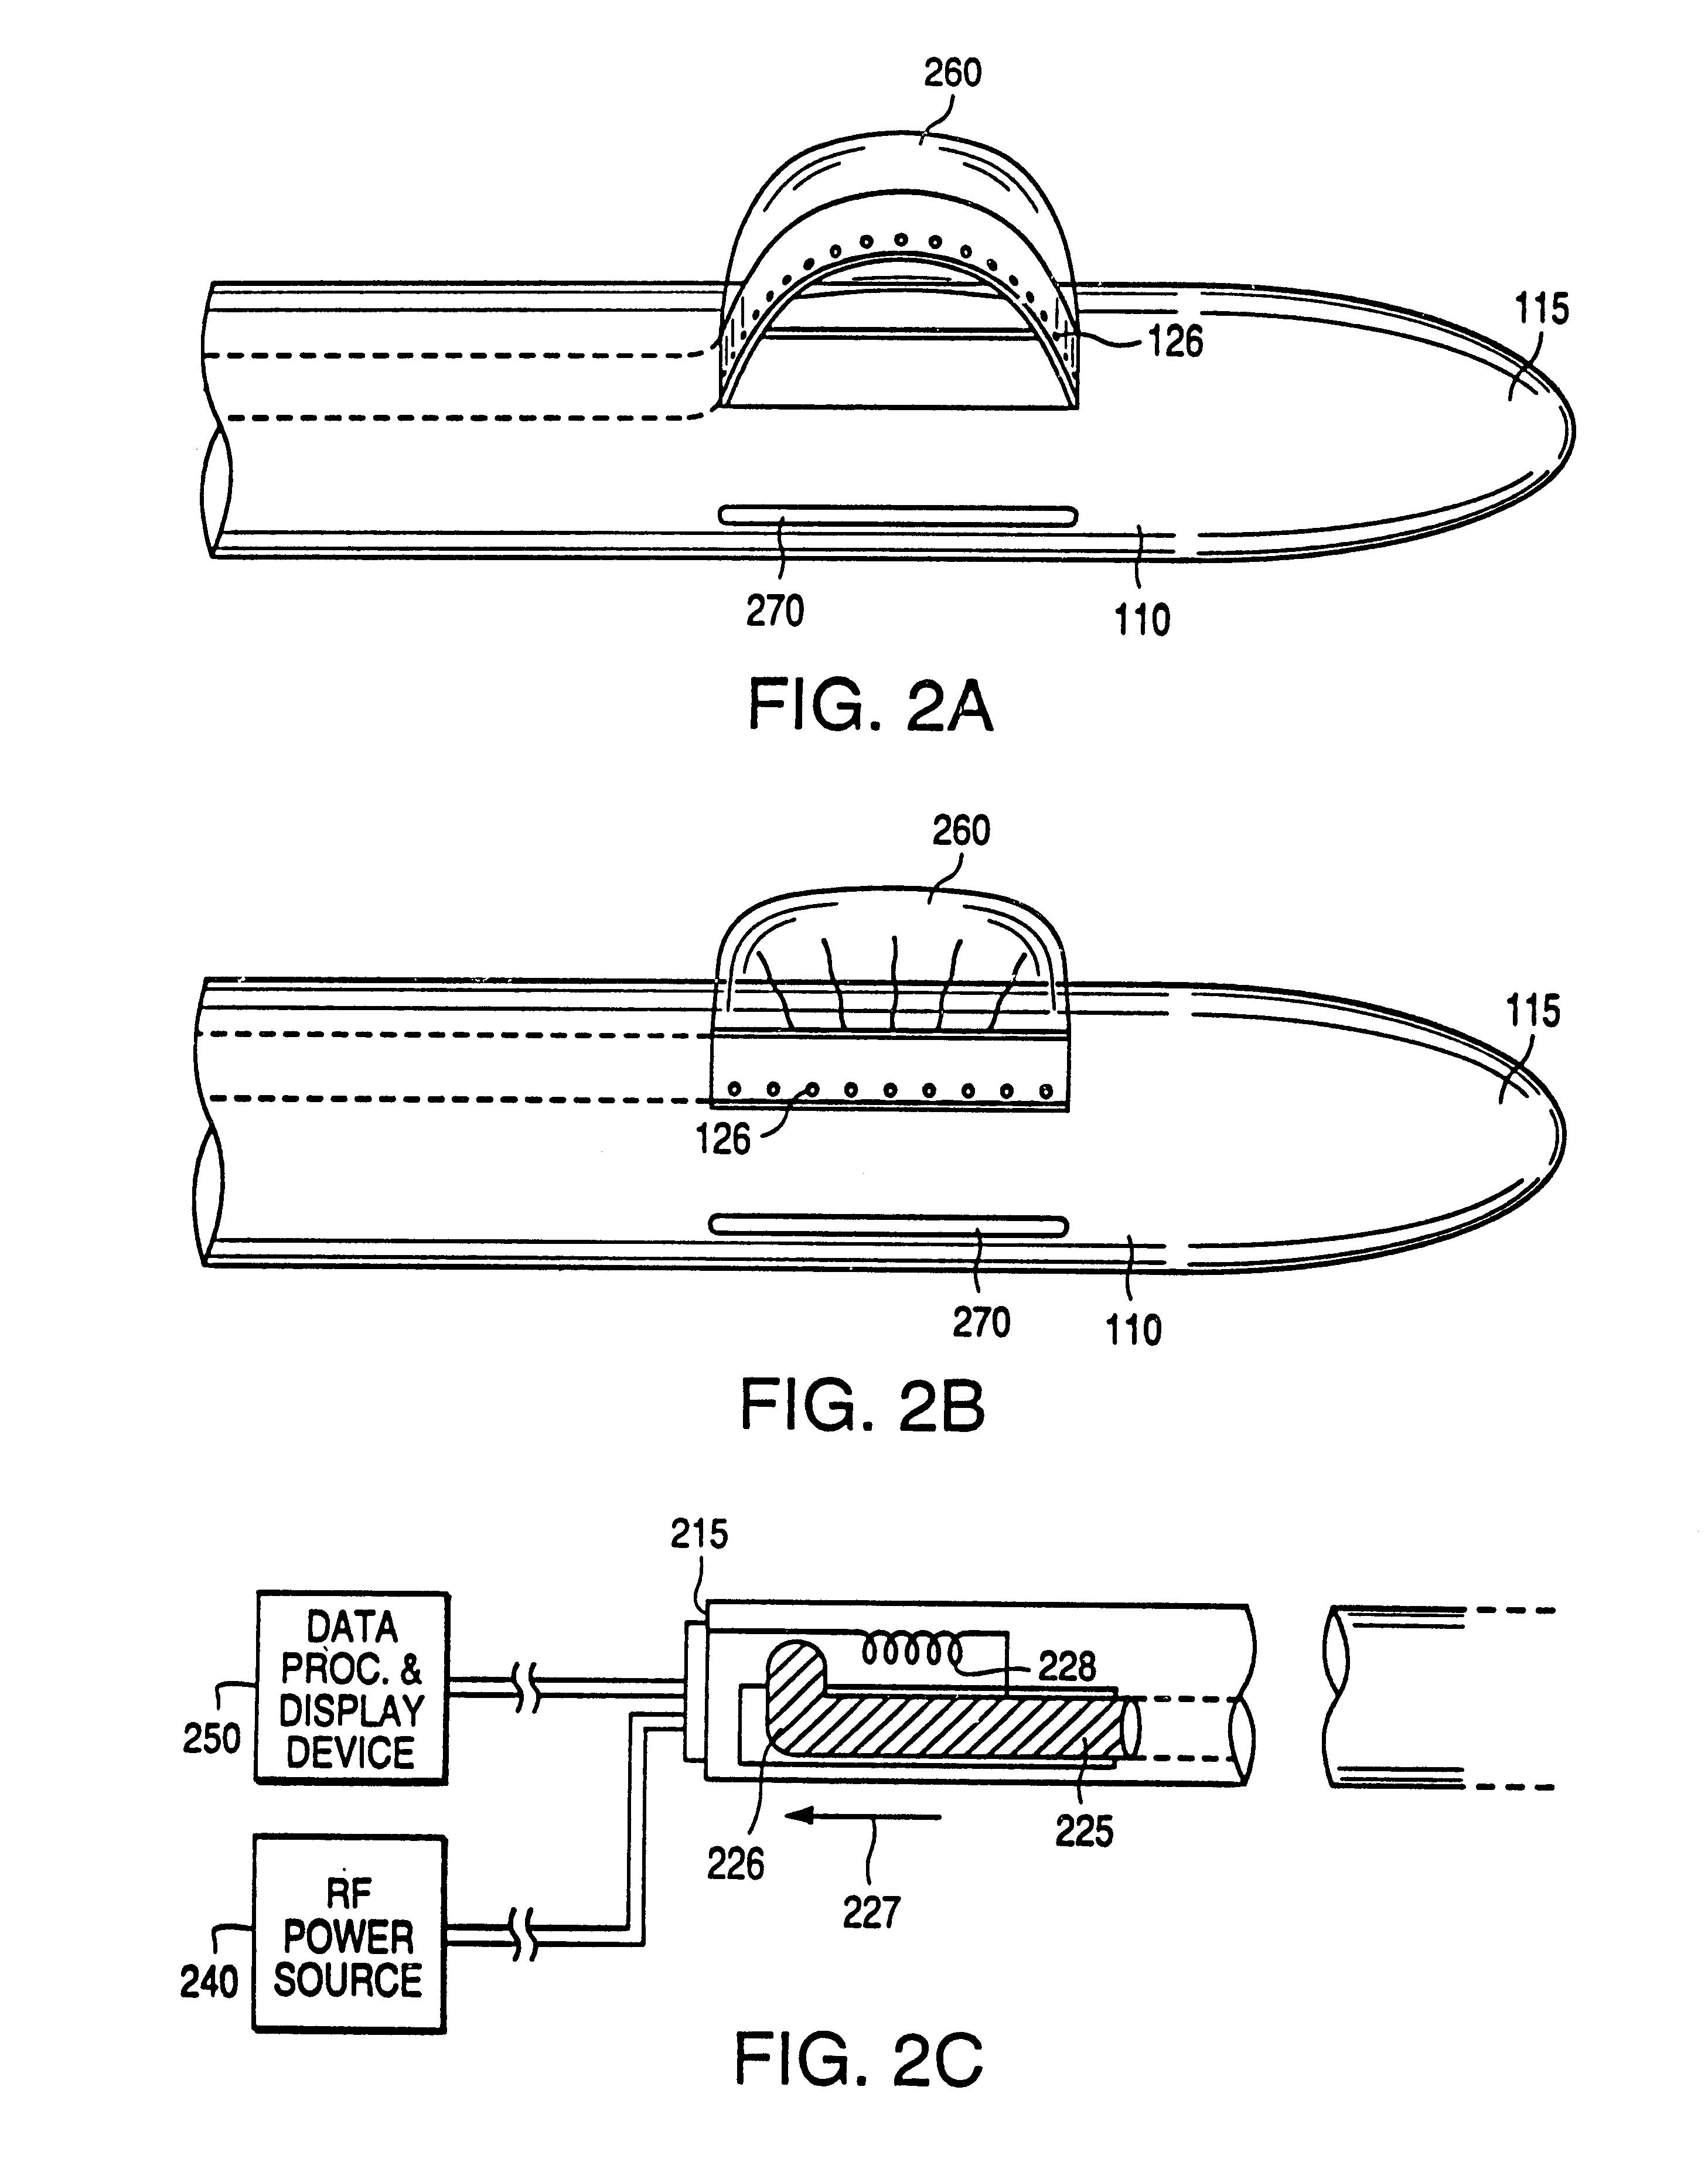 Excisional biopsy device and methods